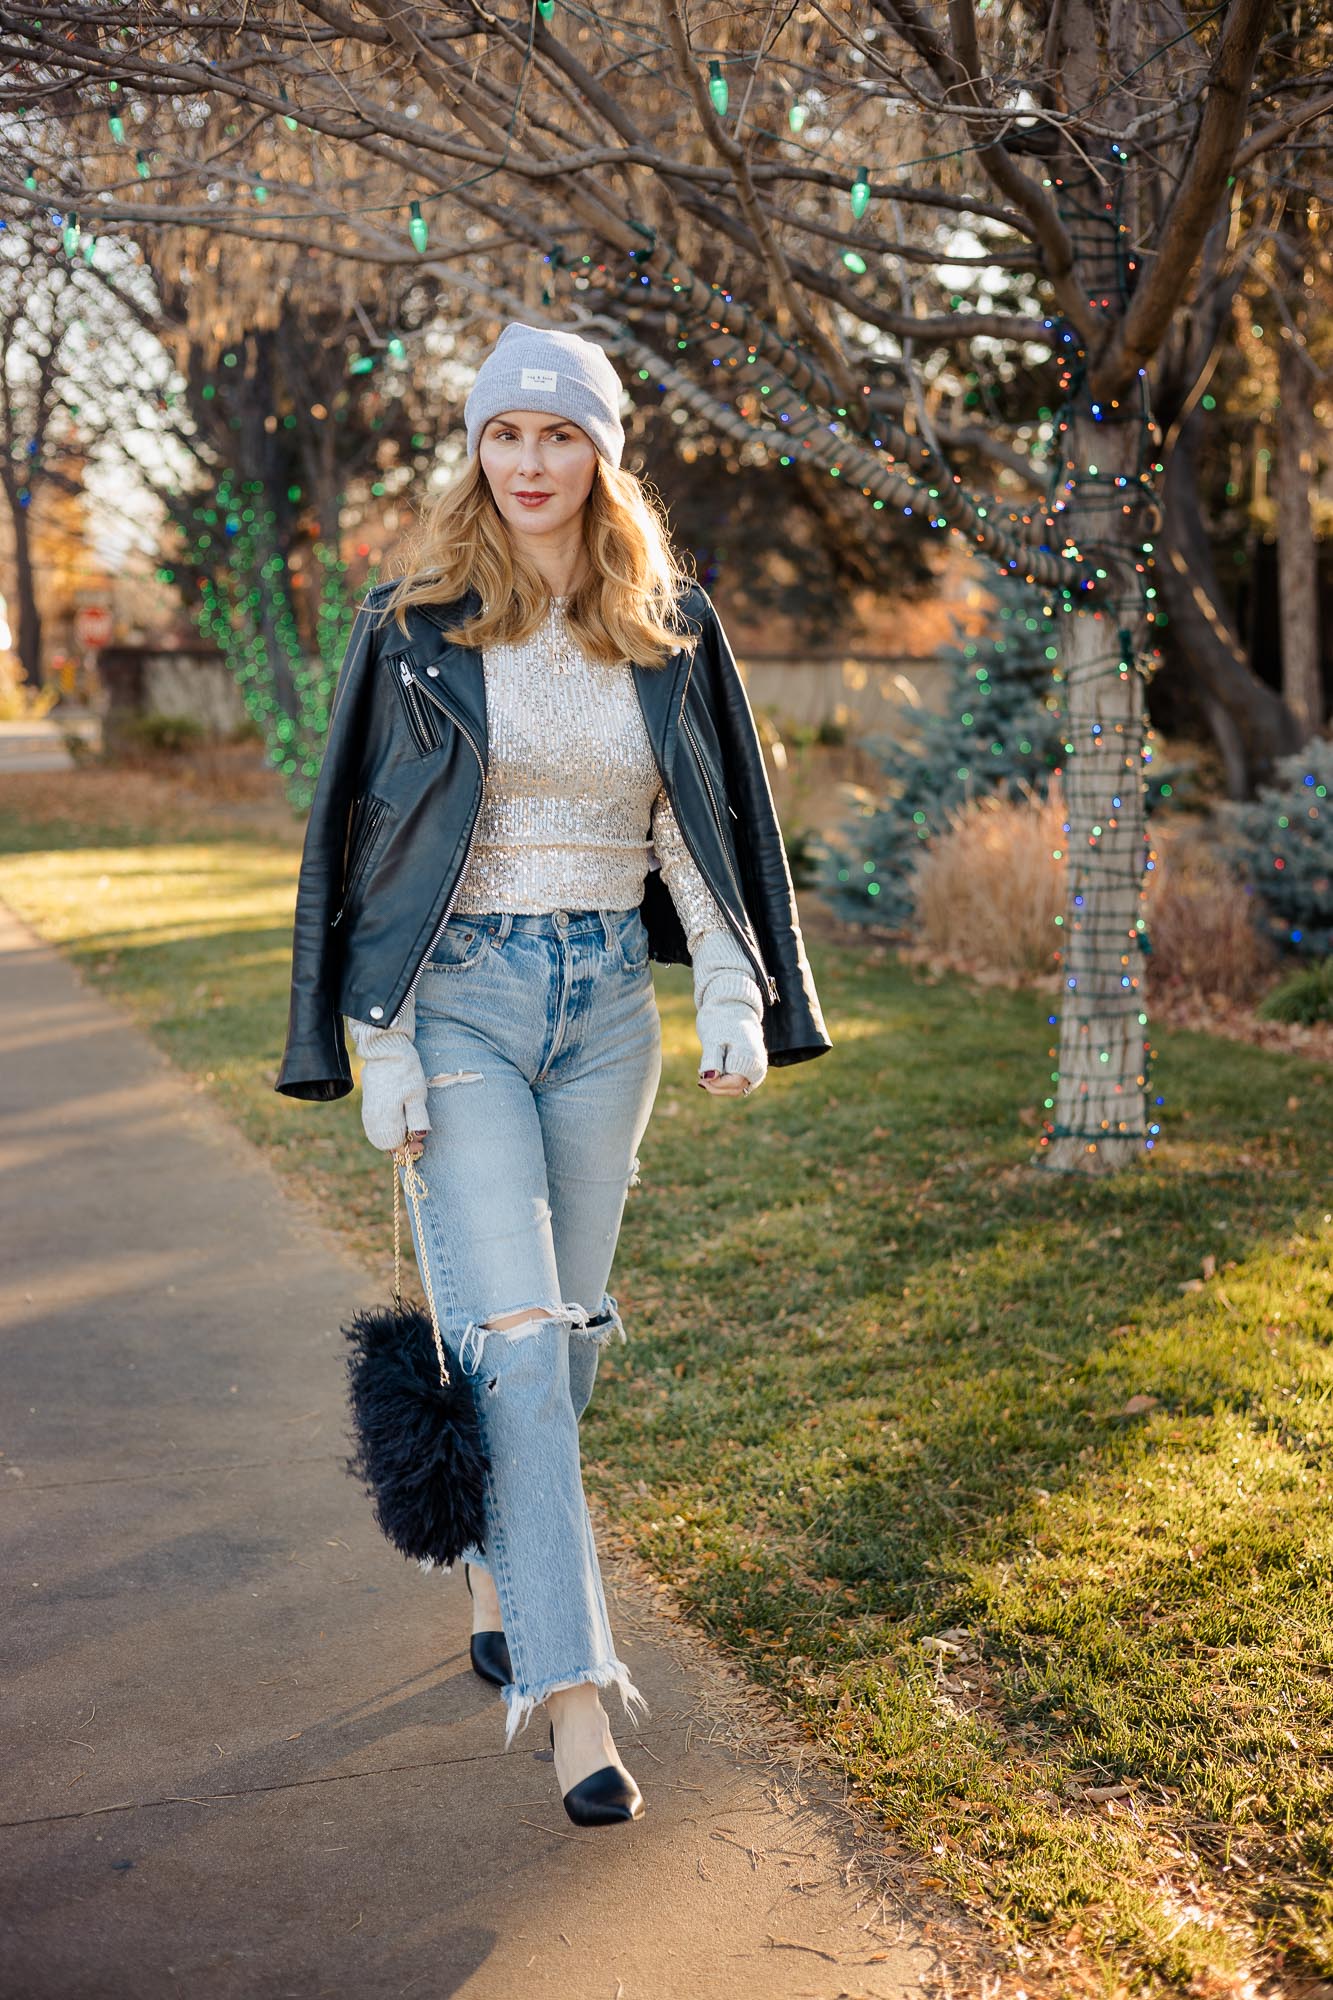 Wearing the free people sequin top in silver with Moussy Odessa jeans and a Iro leather jacket in black.